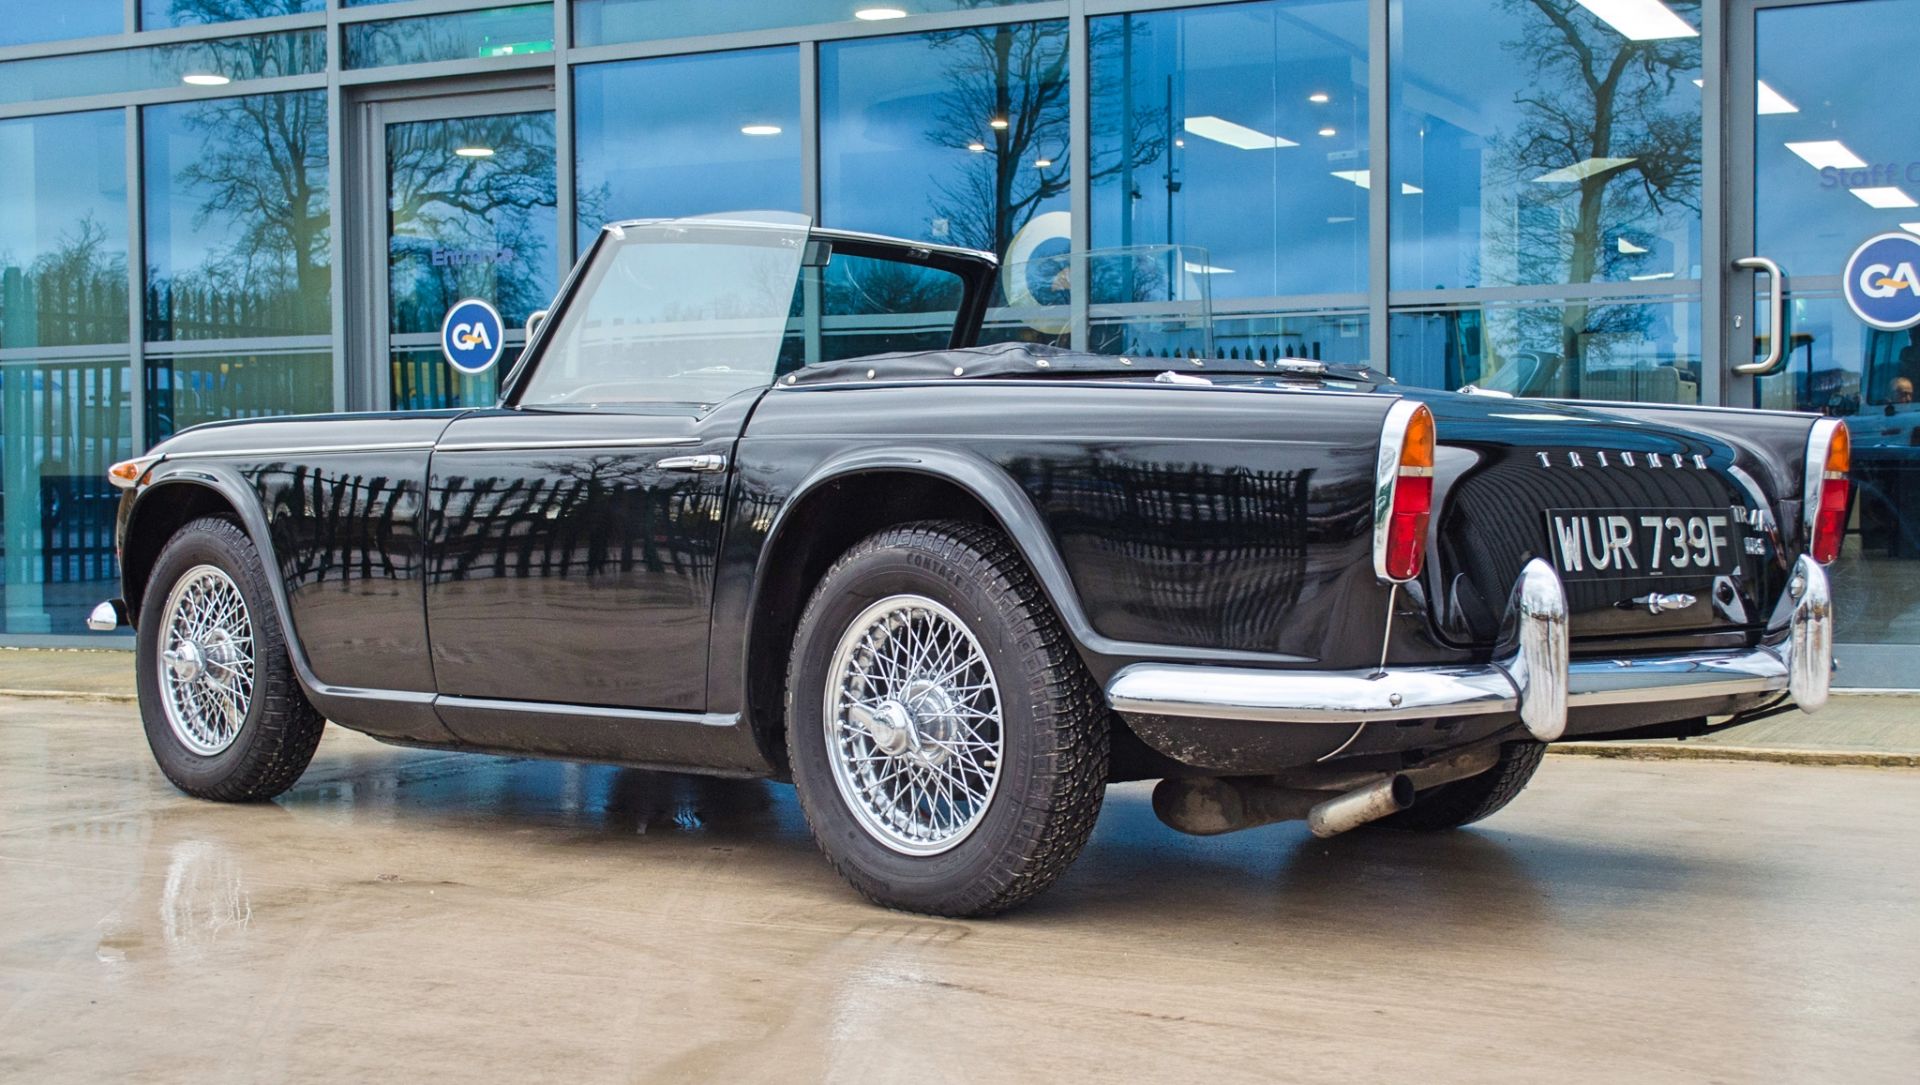 1967 Triumph TR4A IRS 2135cc convertible - Image 7 of 56